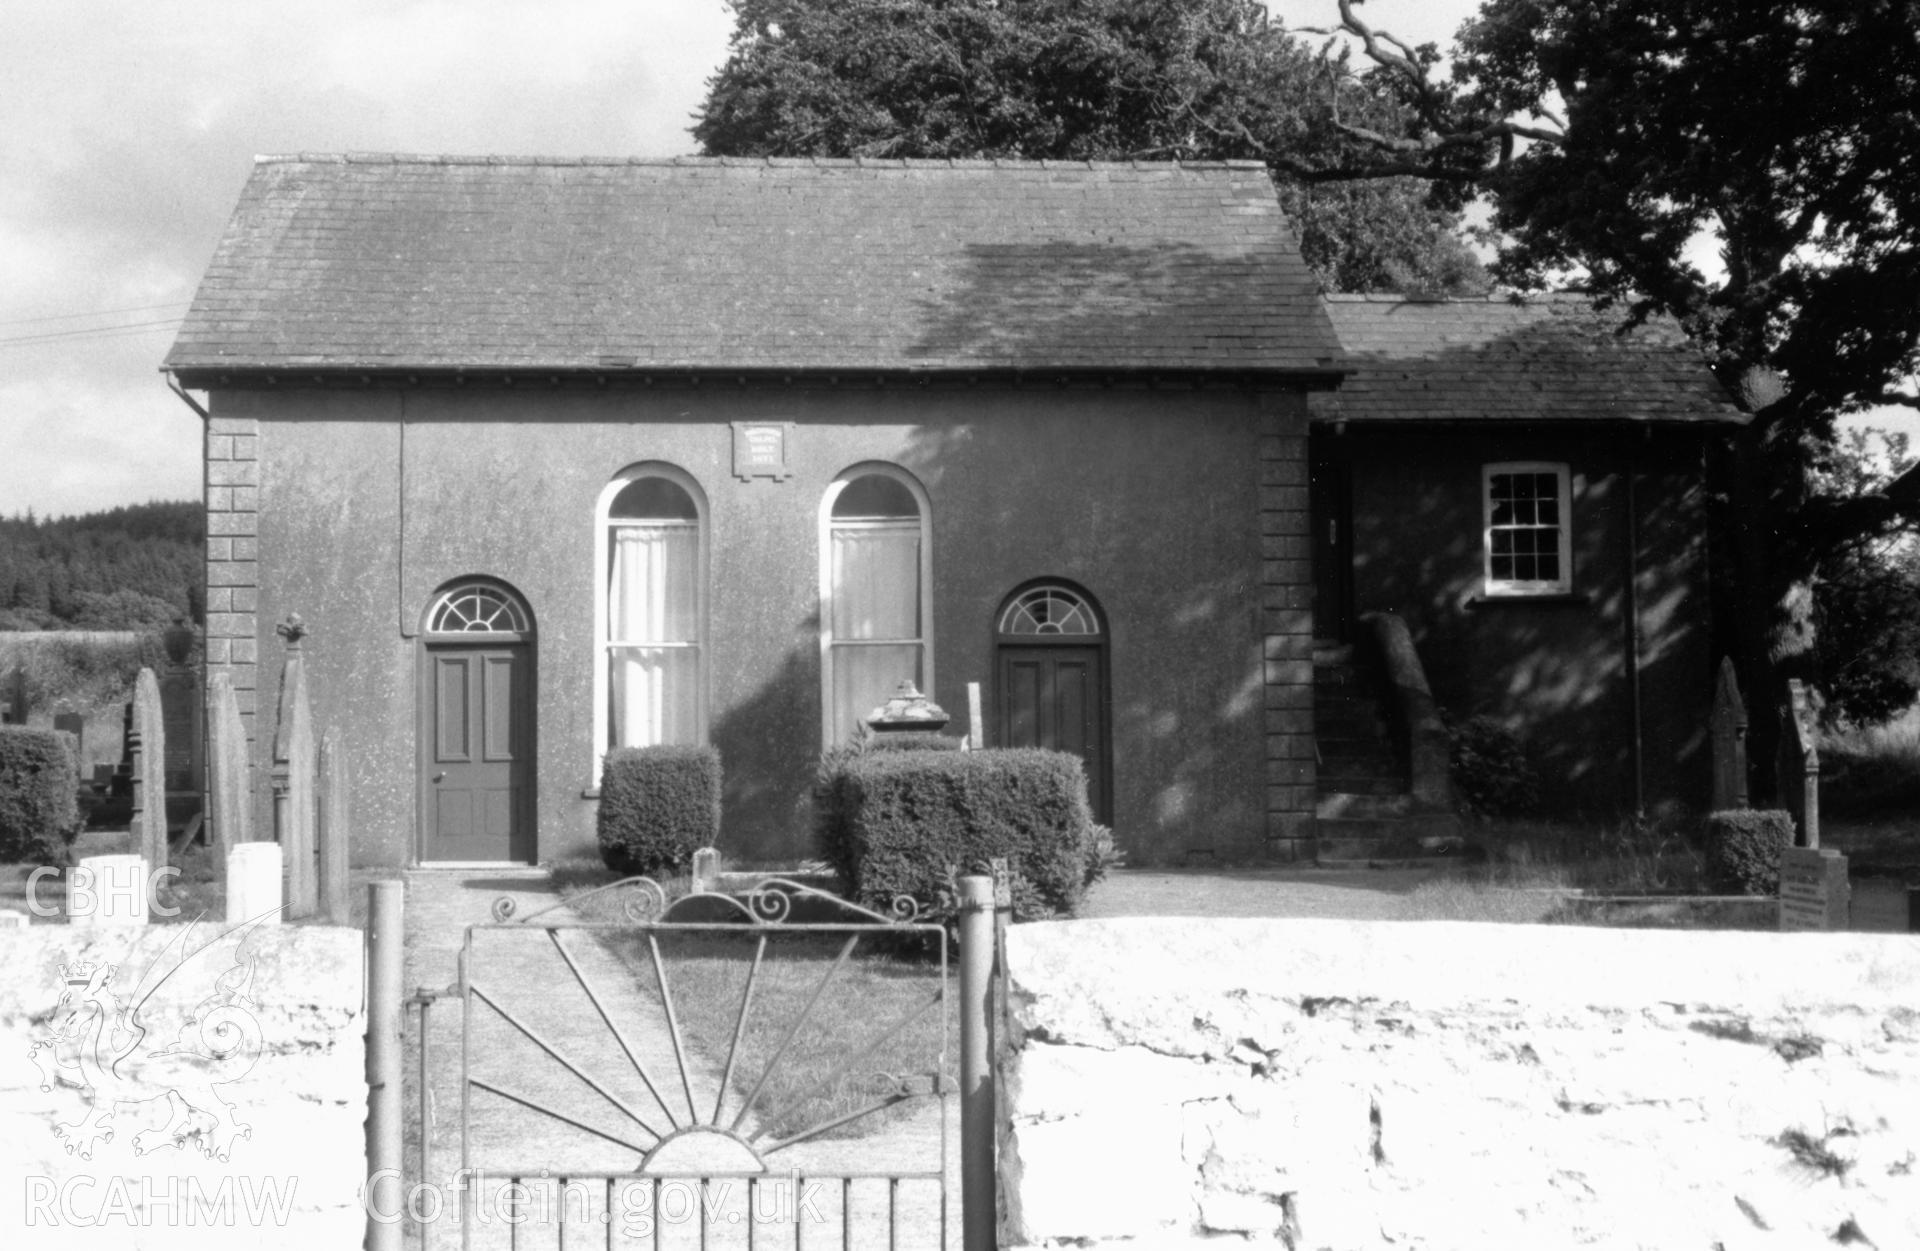 Digital copy of a black and white photograph showing an exterior view of Bwlch-y-rhiw Welsh Independent Chapel, taken by Robert Scourfield, c.1996.